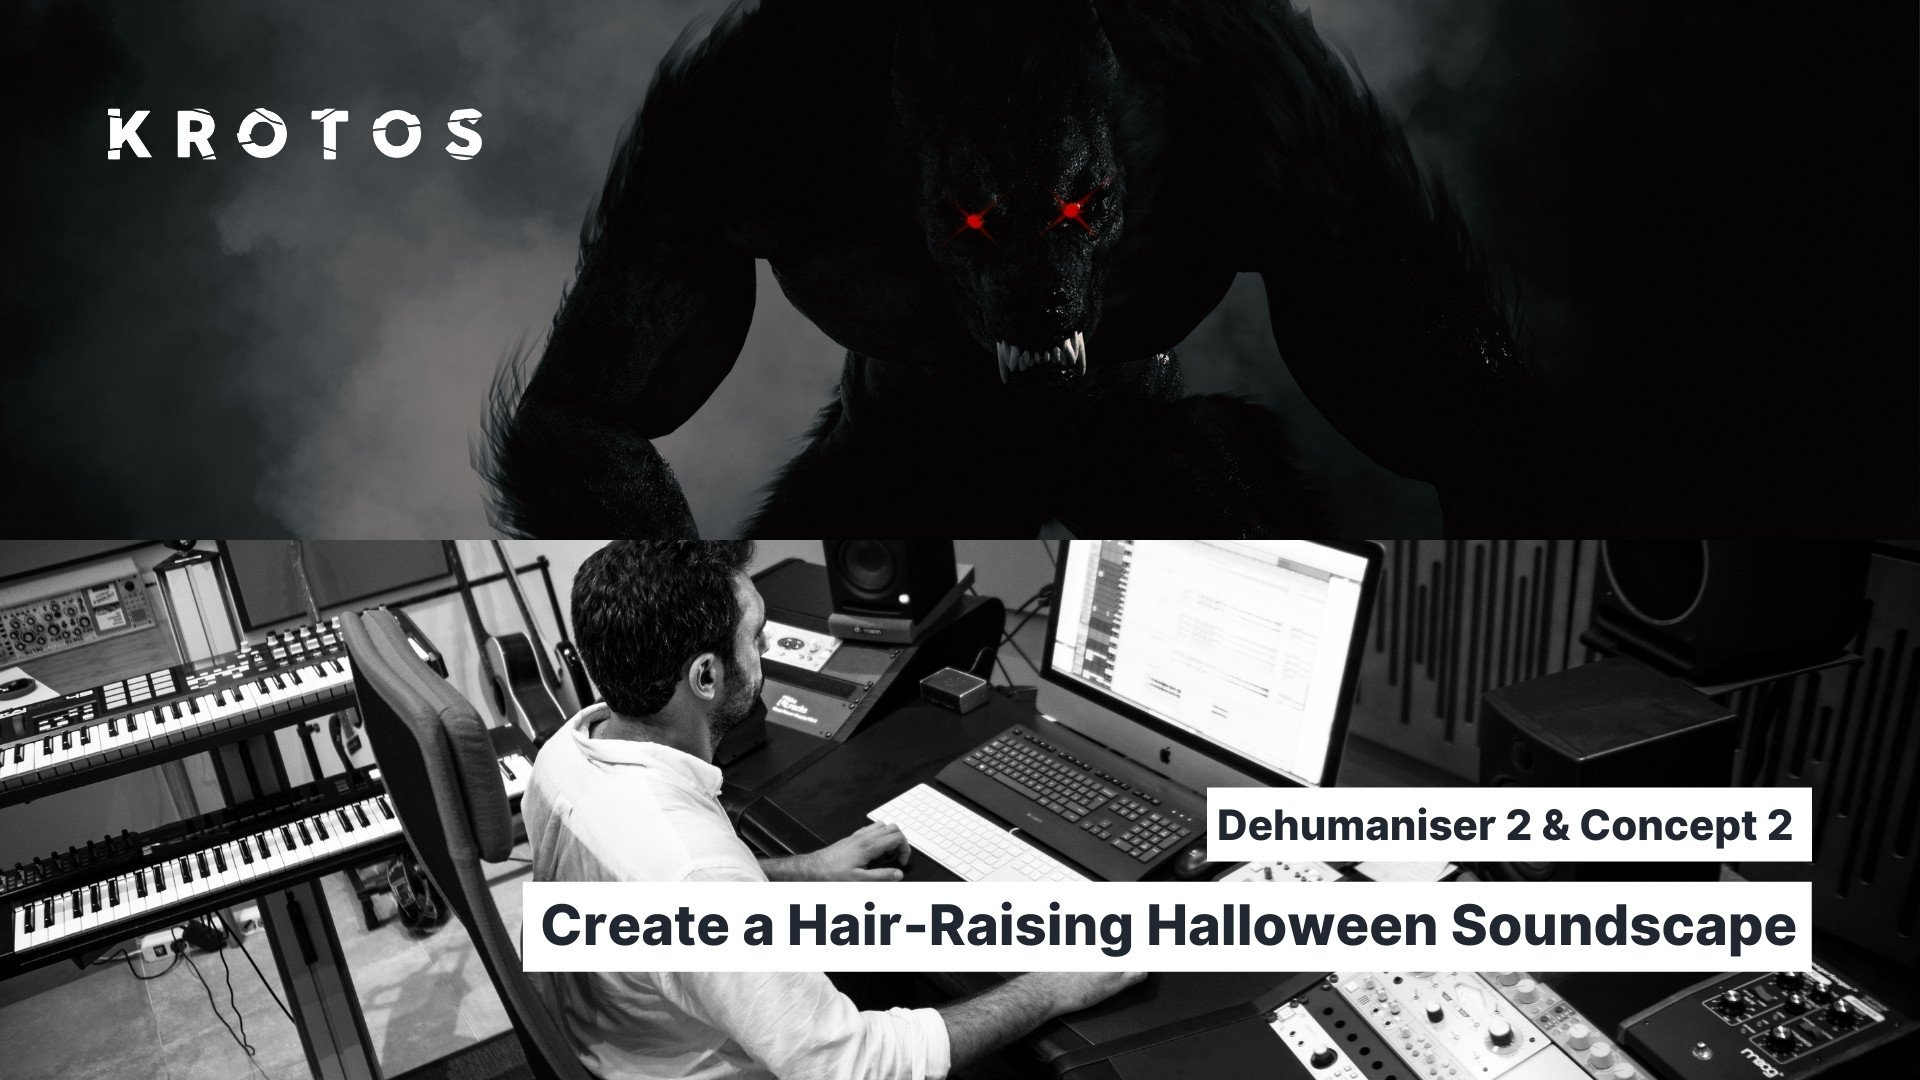 How To Create a Hair-Raising Soundscape This Halloween